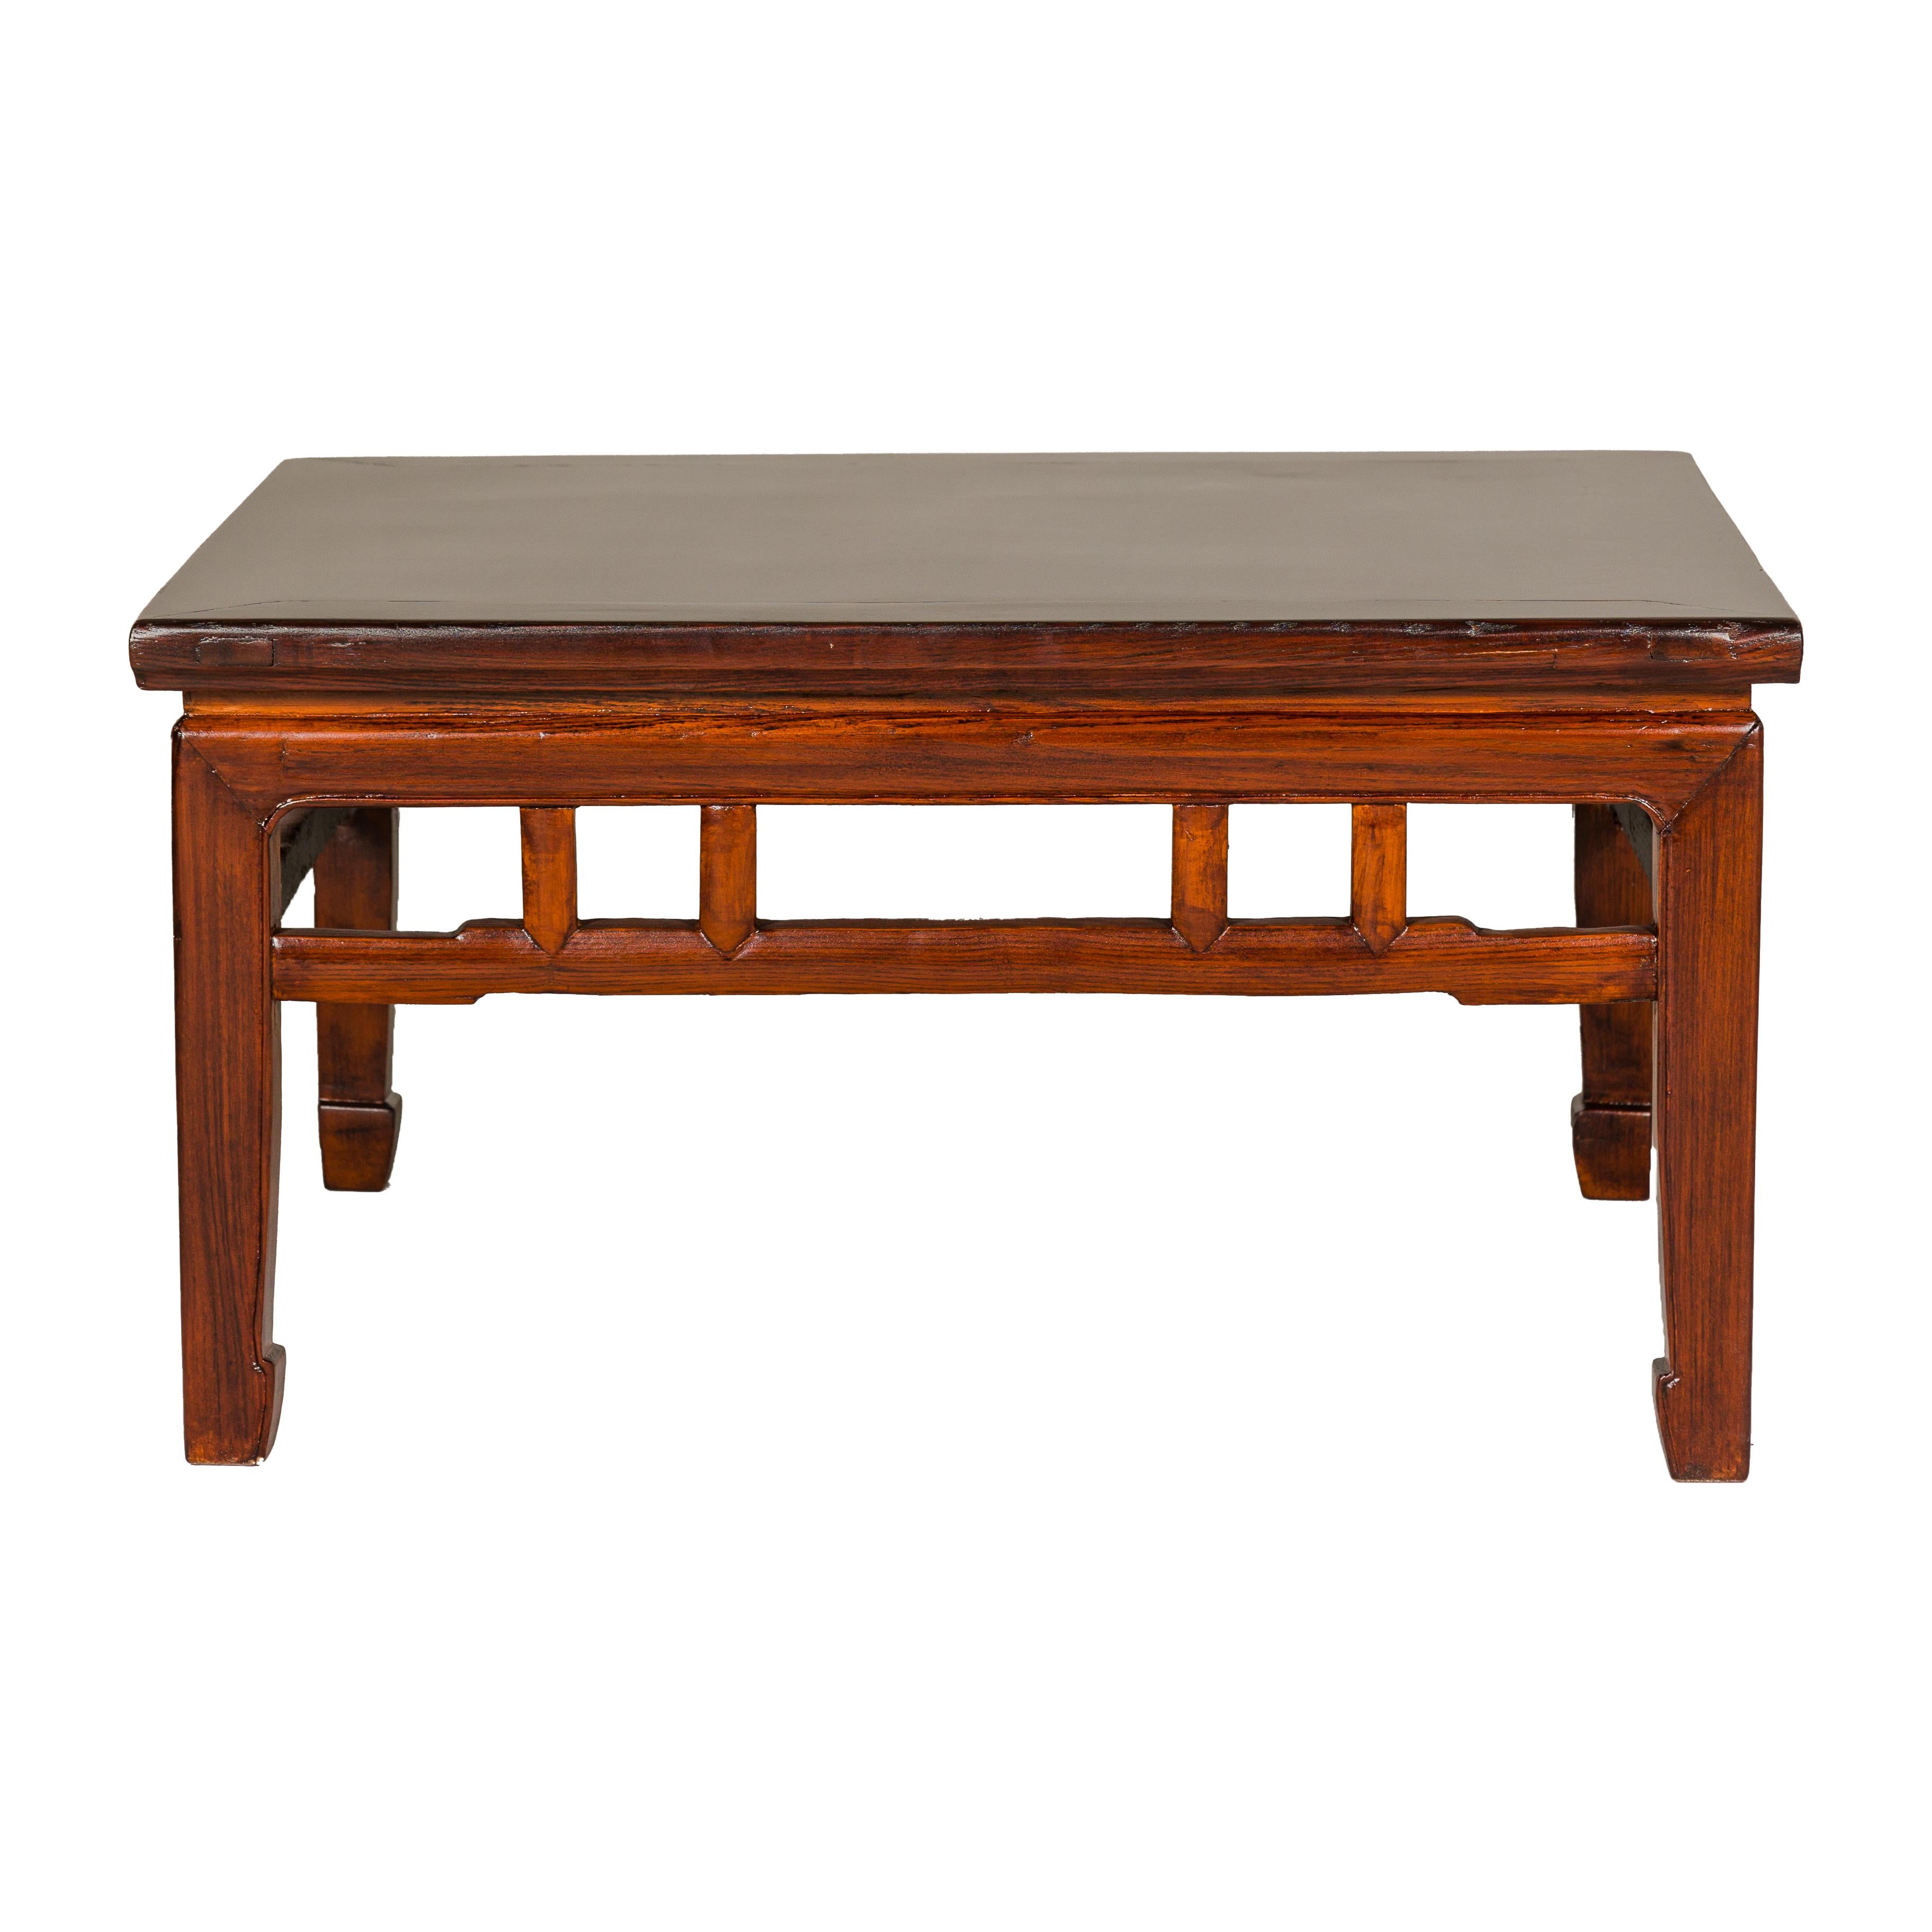 Low Square Coffee Table with Brown Lacquer, Horse Hoof Legs, Humpback Stretcher  For Sale 10